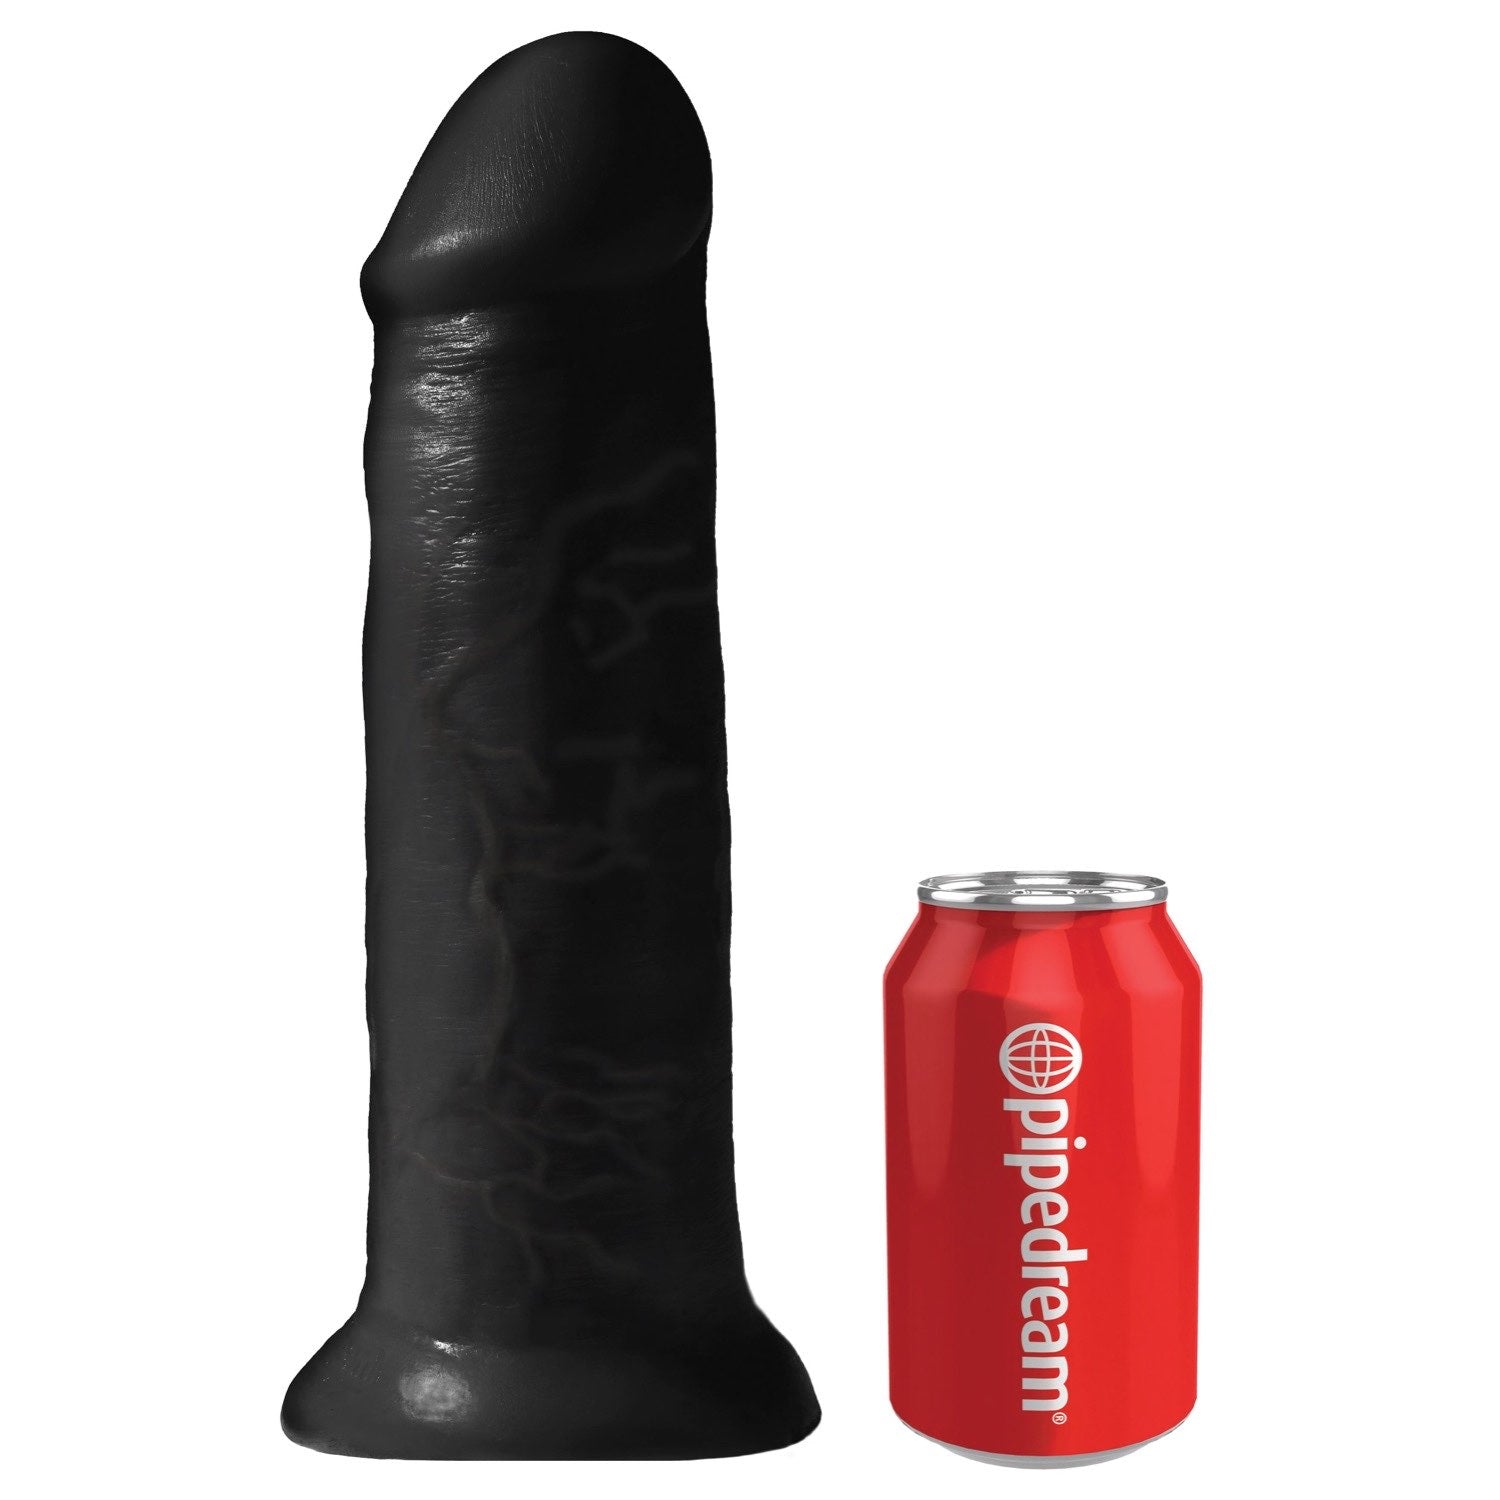 King Cock 12IN Cock - Black by Pipedream